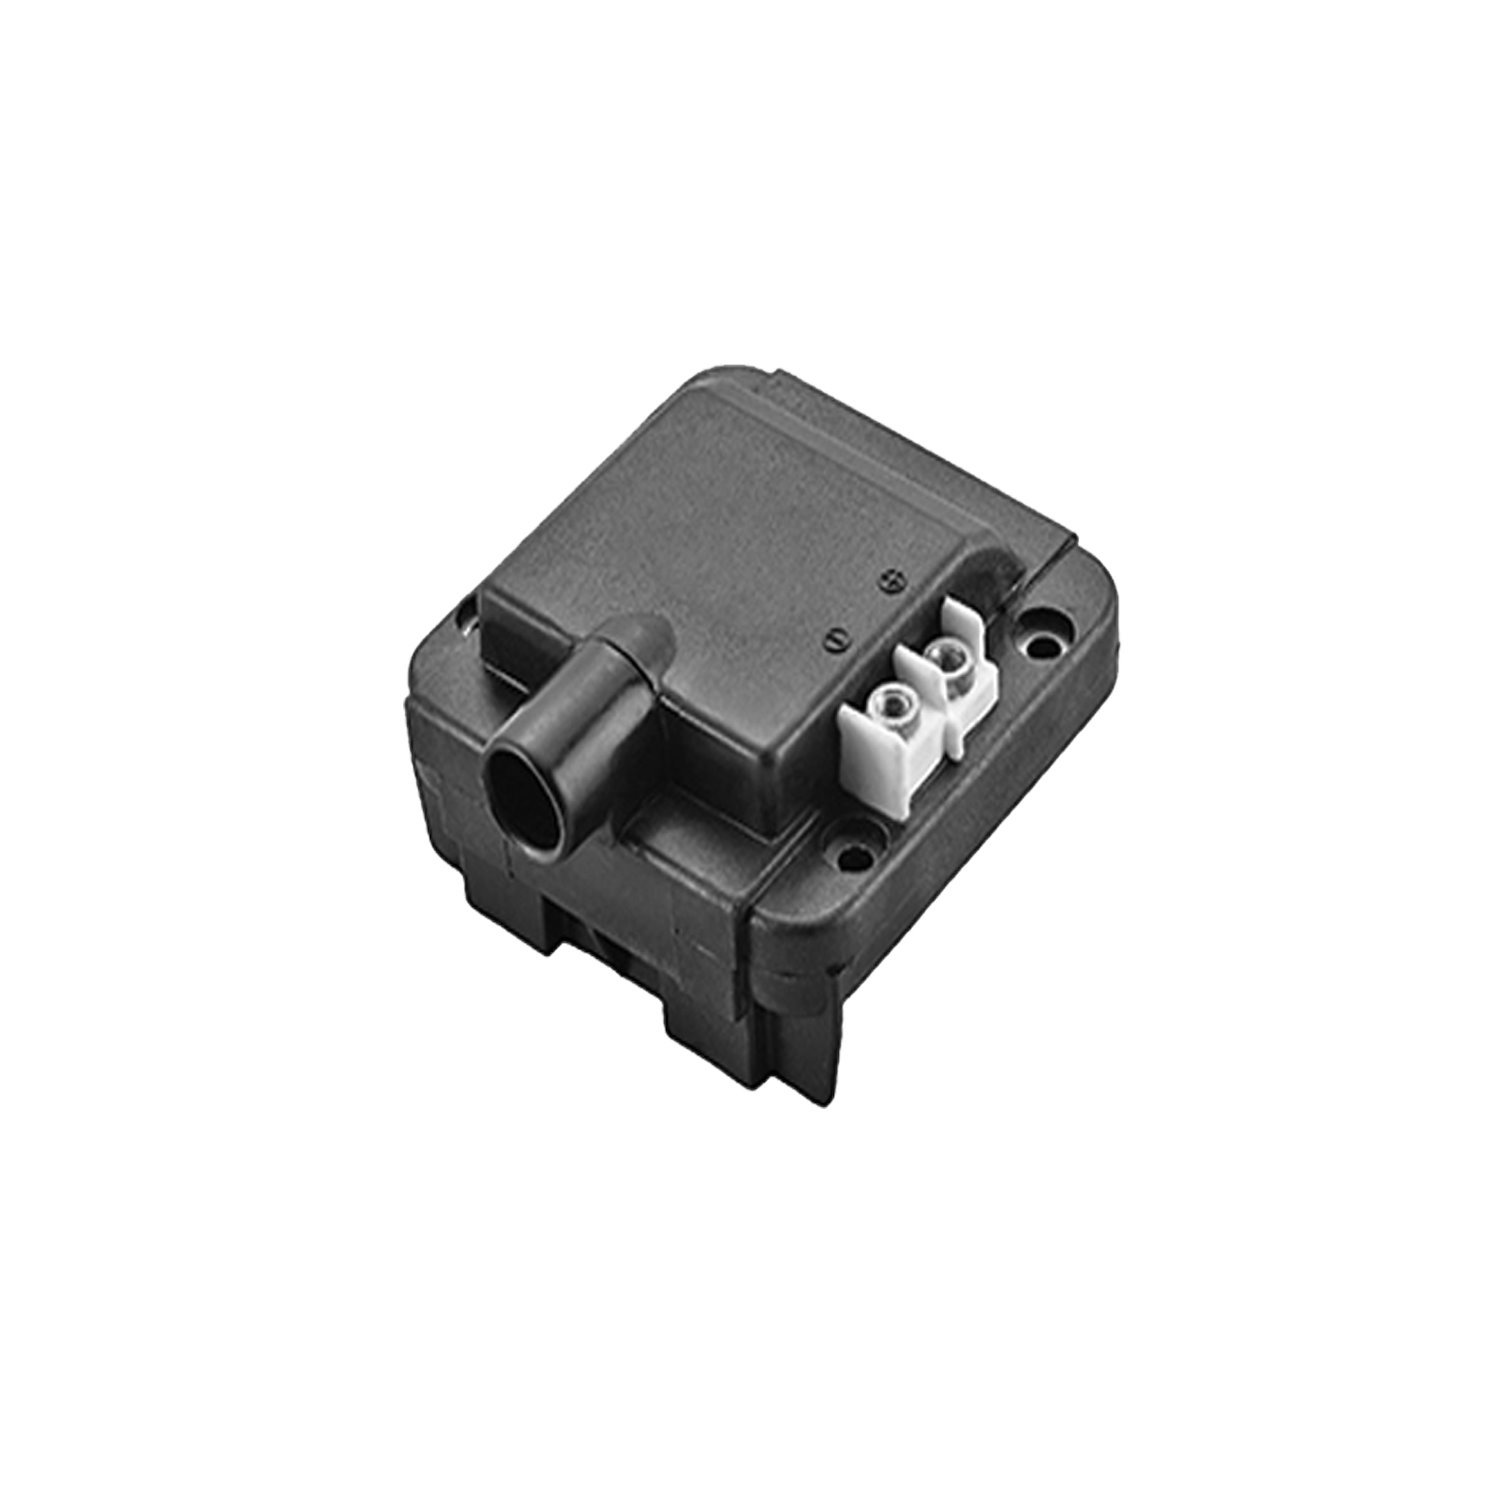 OE Replacement Ignition Coil for 1990-1991 Honda Civic & CRX 1.5/1.6L/ Acura Integra 1.8L